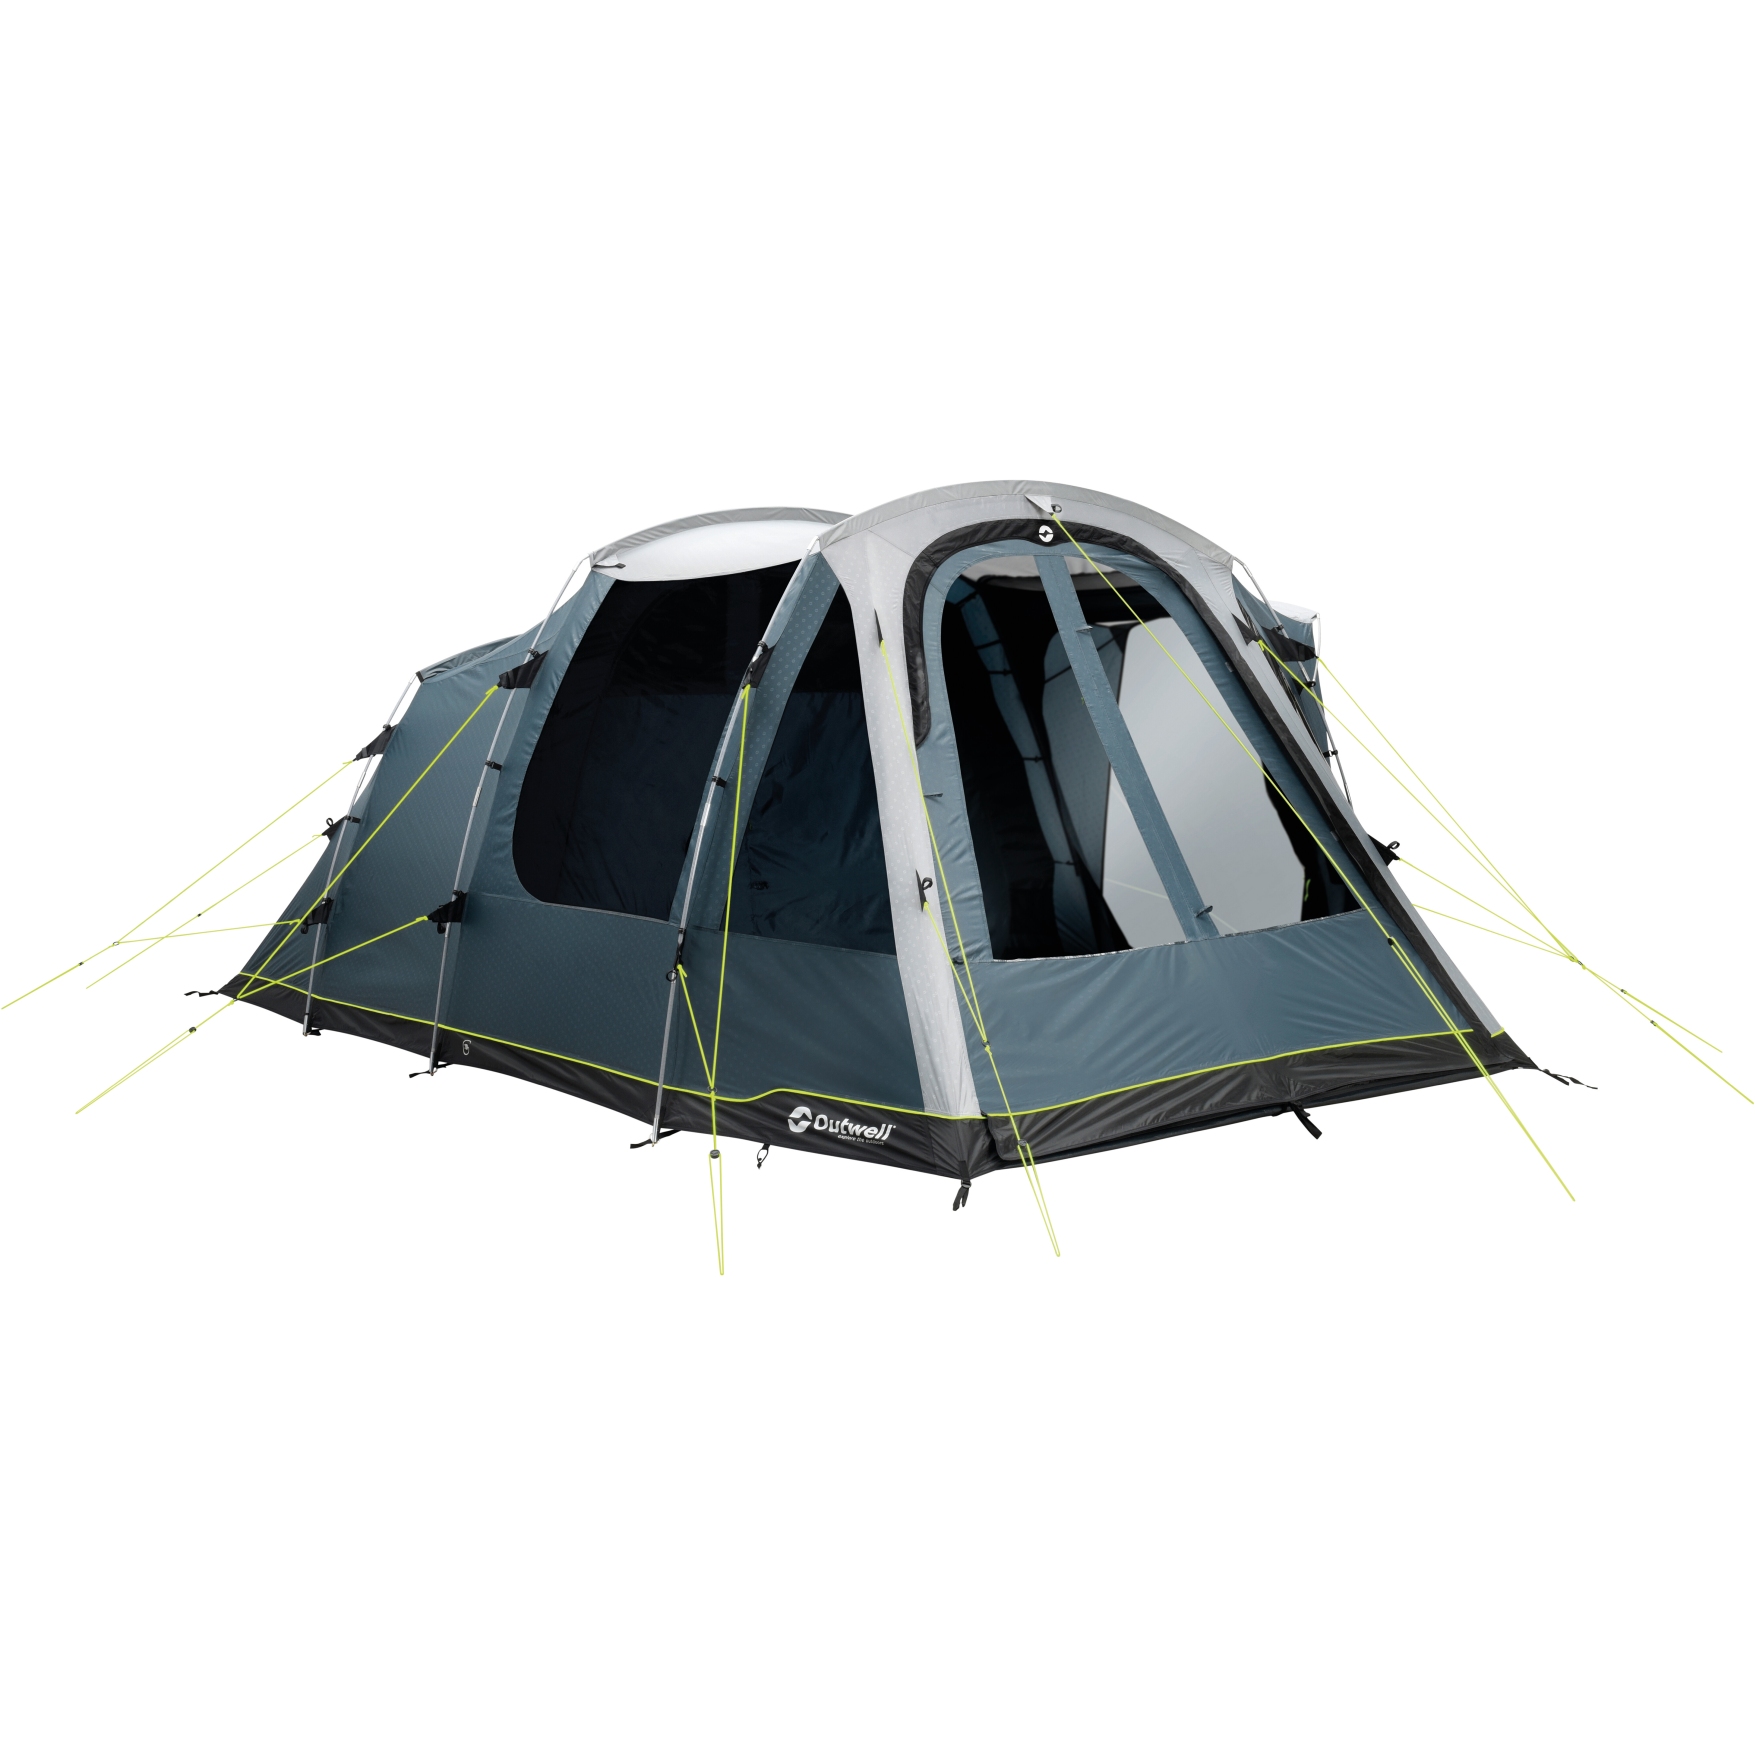 Productfoto van Outwell Springwood 5SG Tent - Blauw